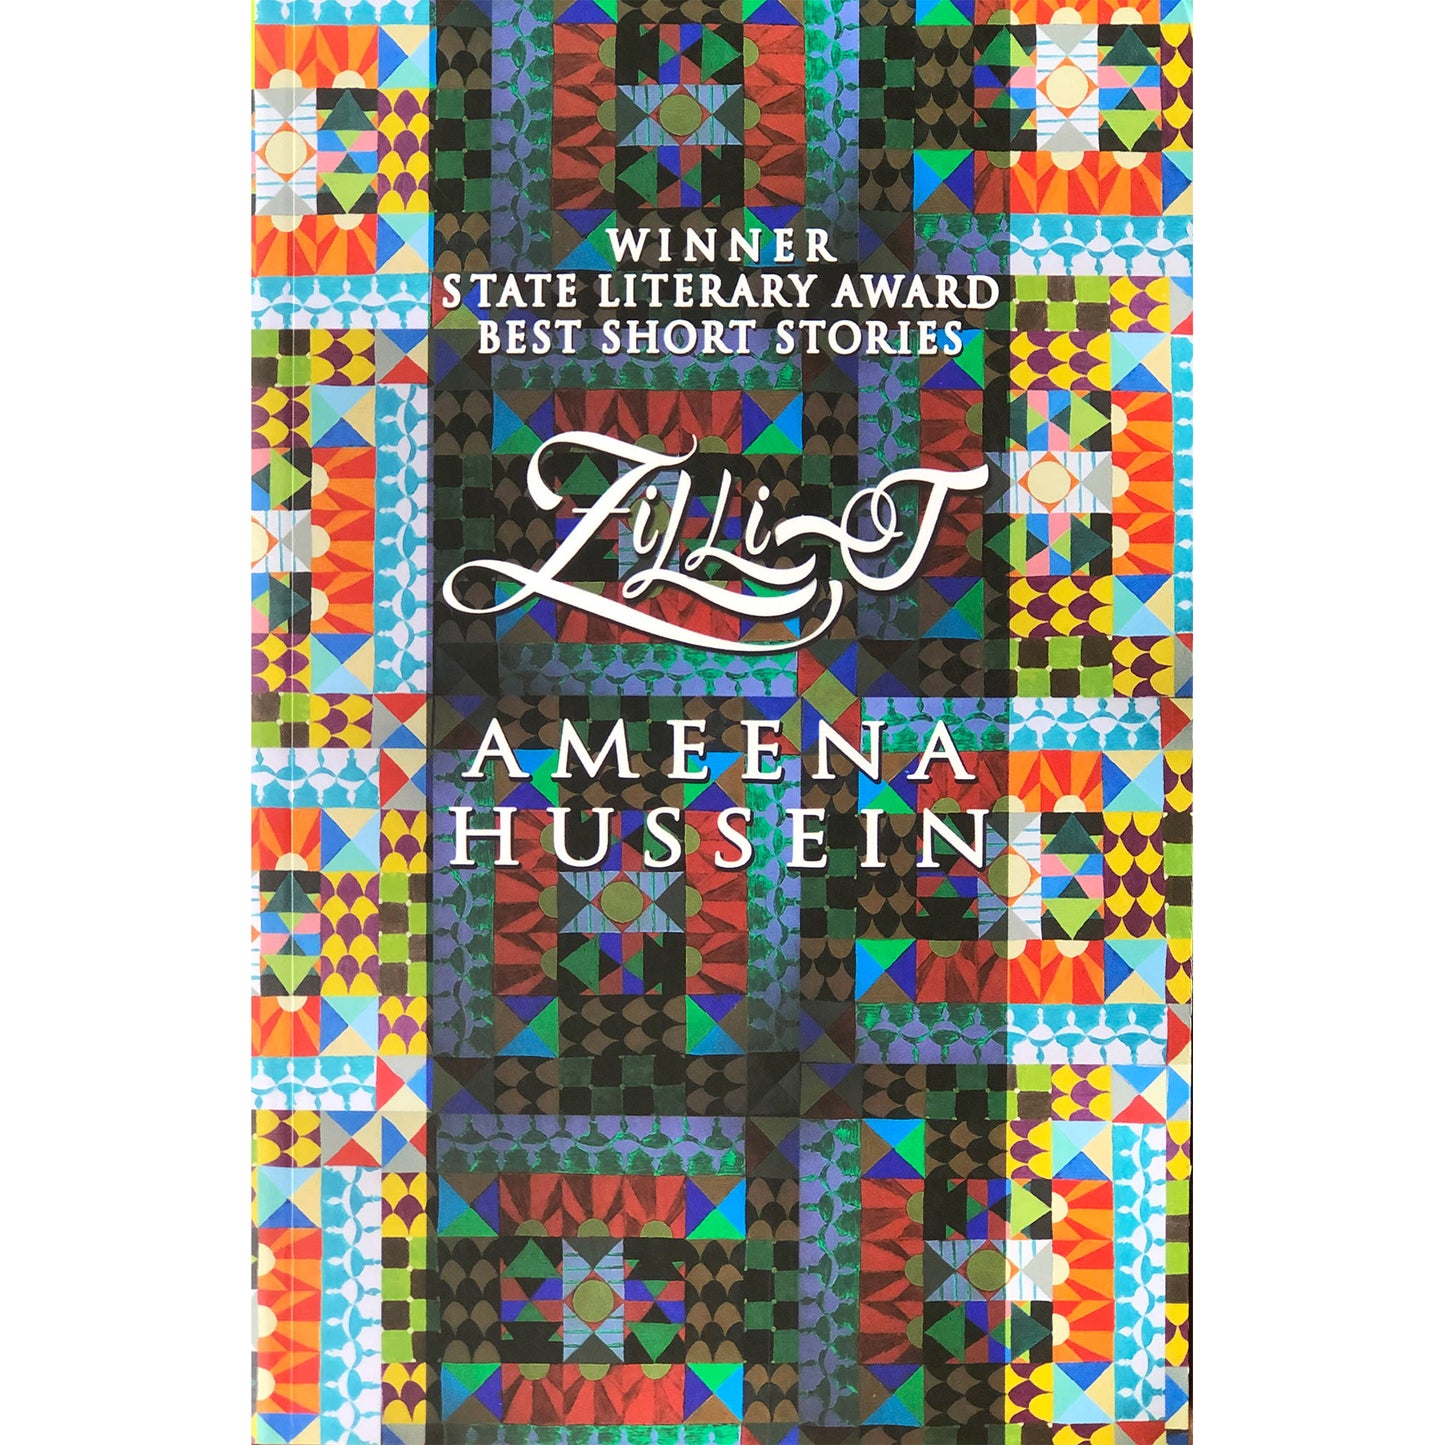 Zillij By Ameena Hussein.  (winner of State Literary award for Best Short Stories)